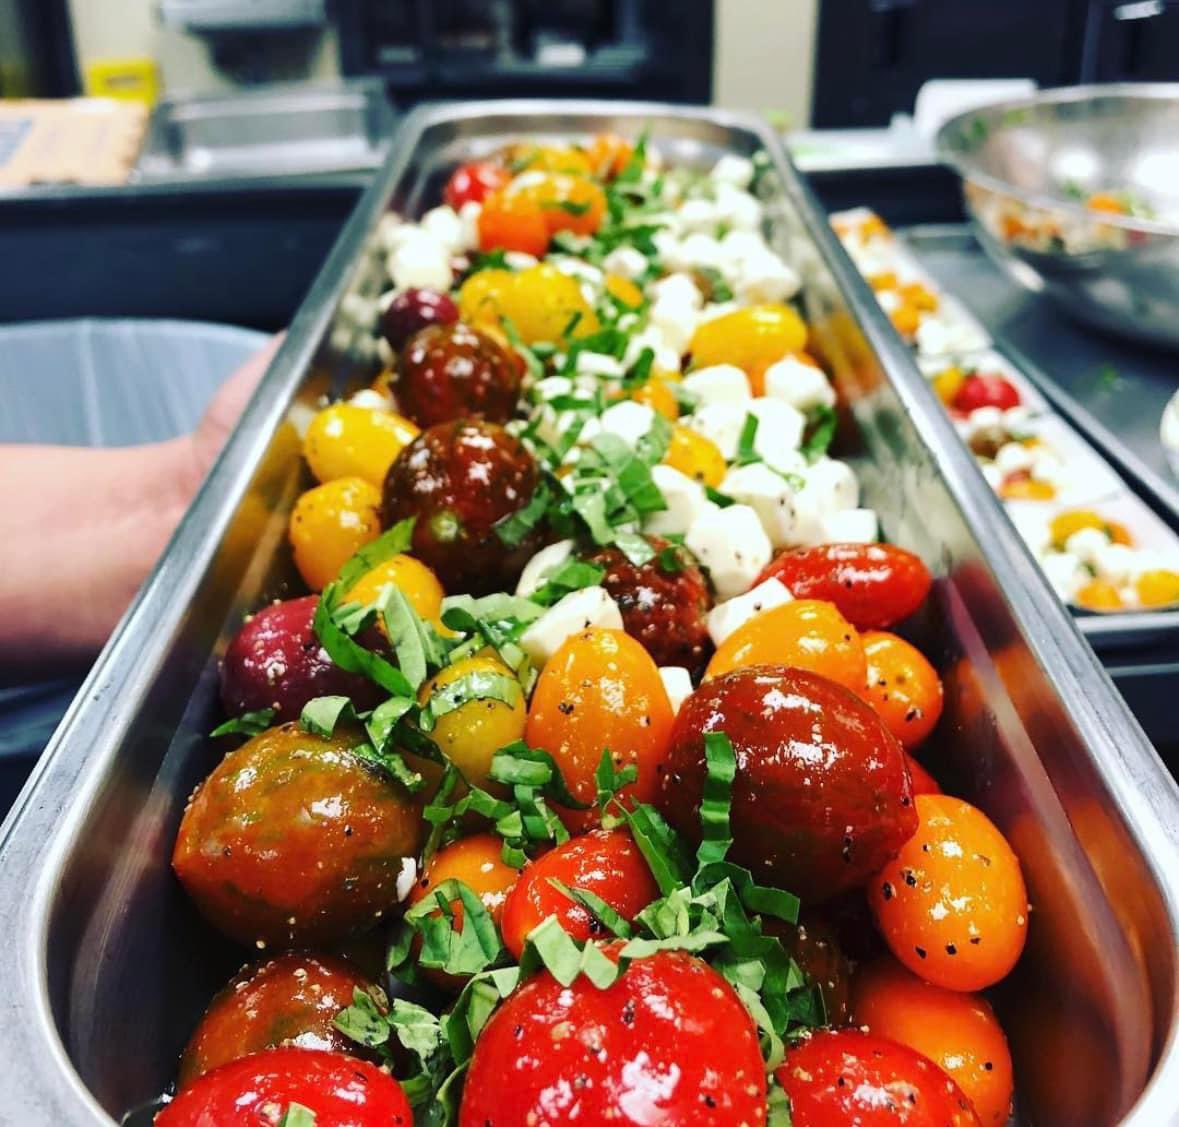 This simple Caprese Salad is a great side dish that will make your serving line pop with color and will get students excited about school meals.

#SchoolFoodRocks #FreshFlavors